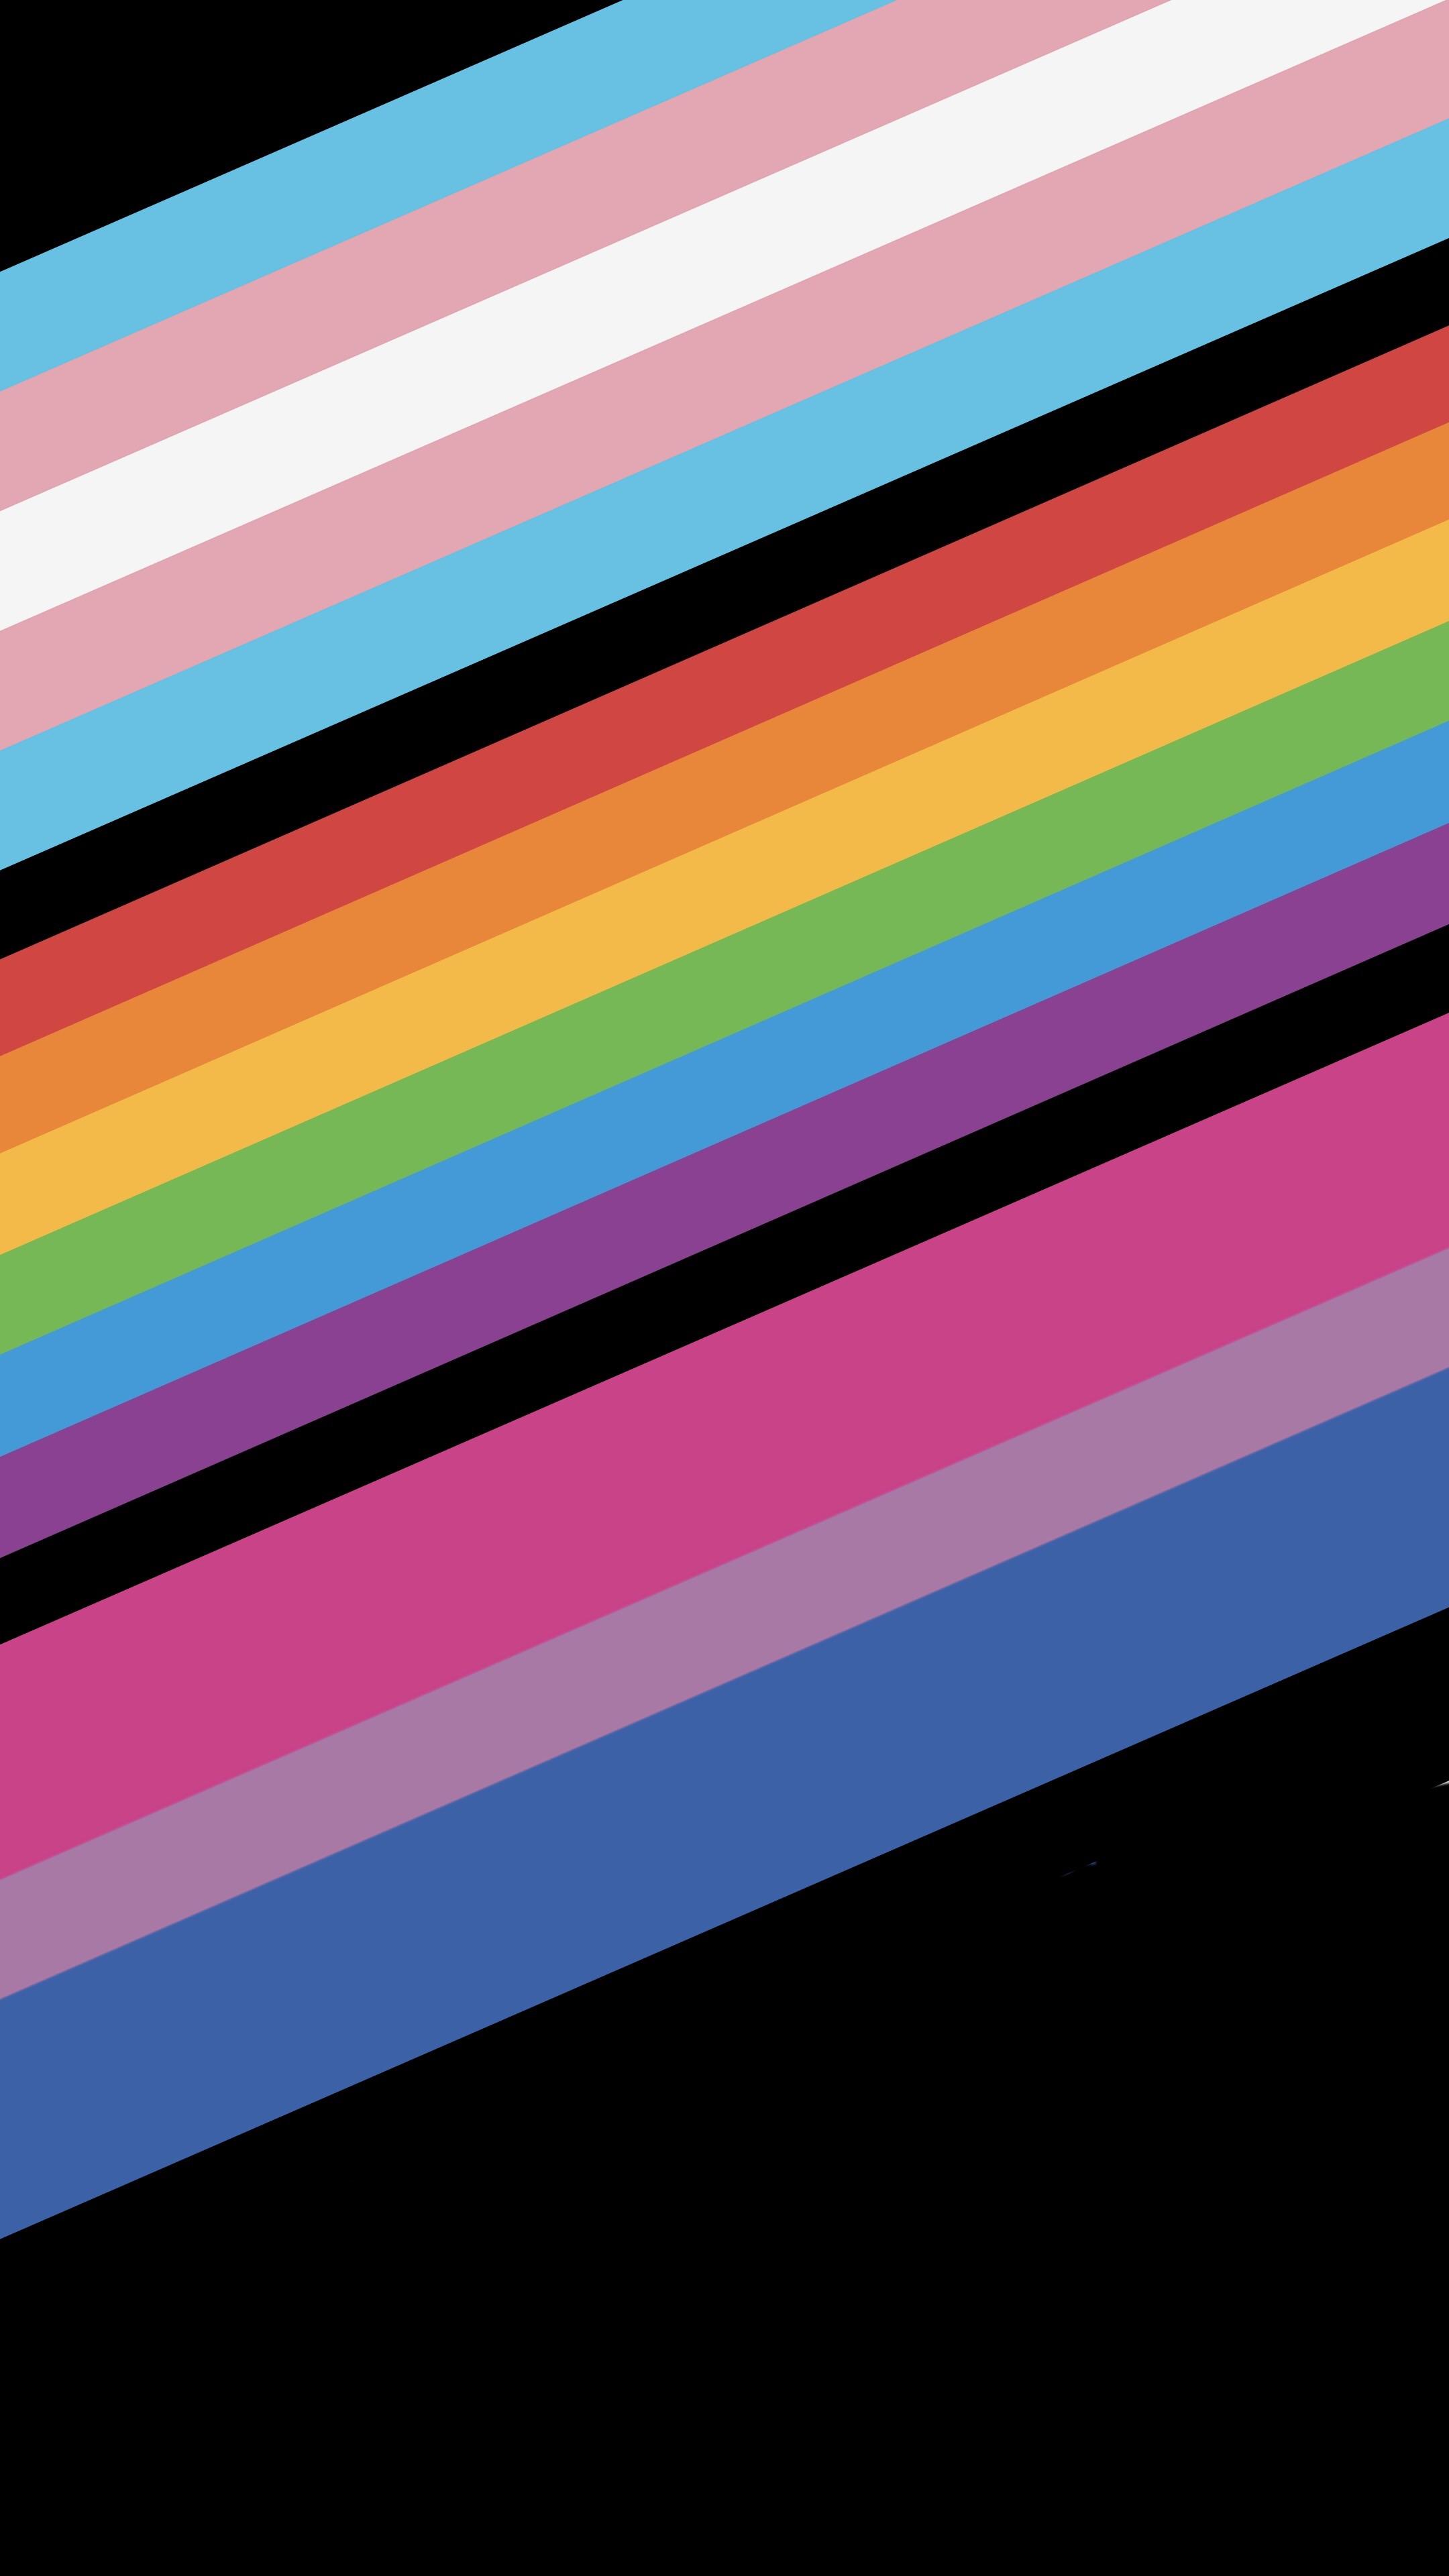 Picture Inspired By U Nzmeow42 I Made My Own LGBT Wallpaper, Not As Discreet But I Like It